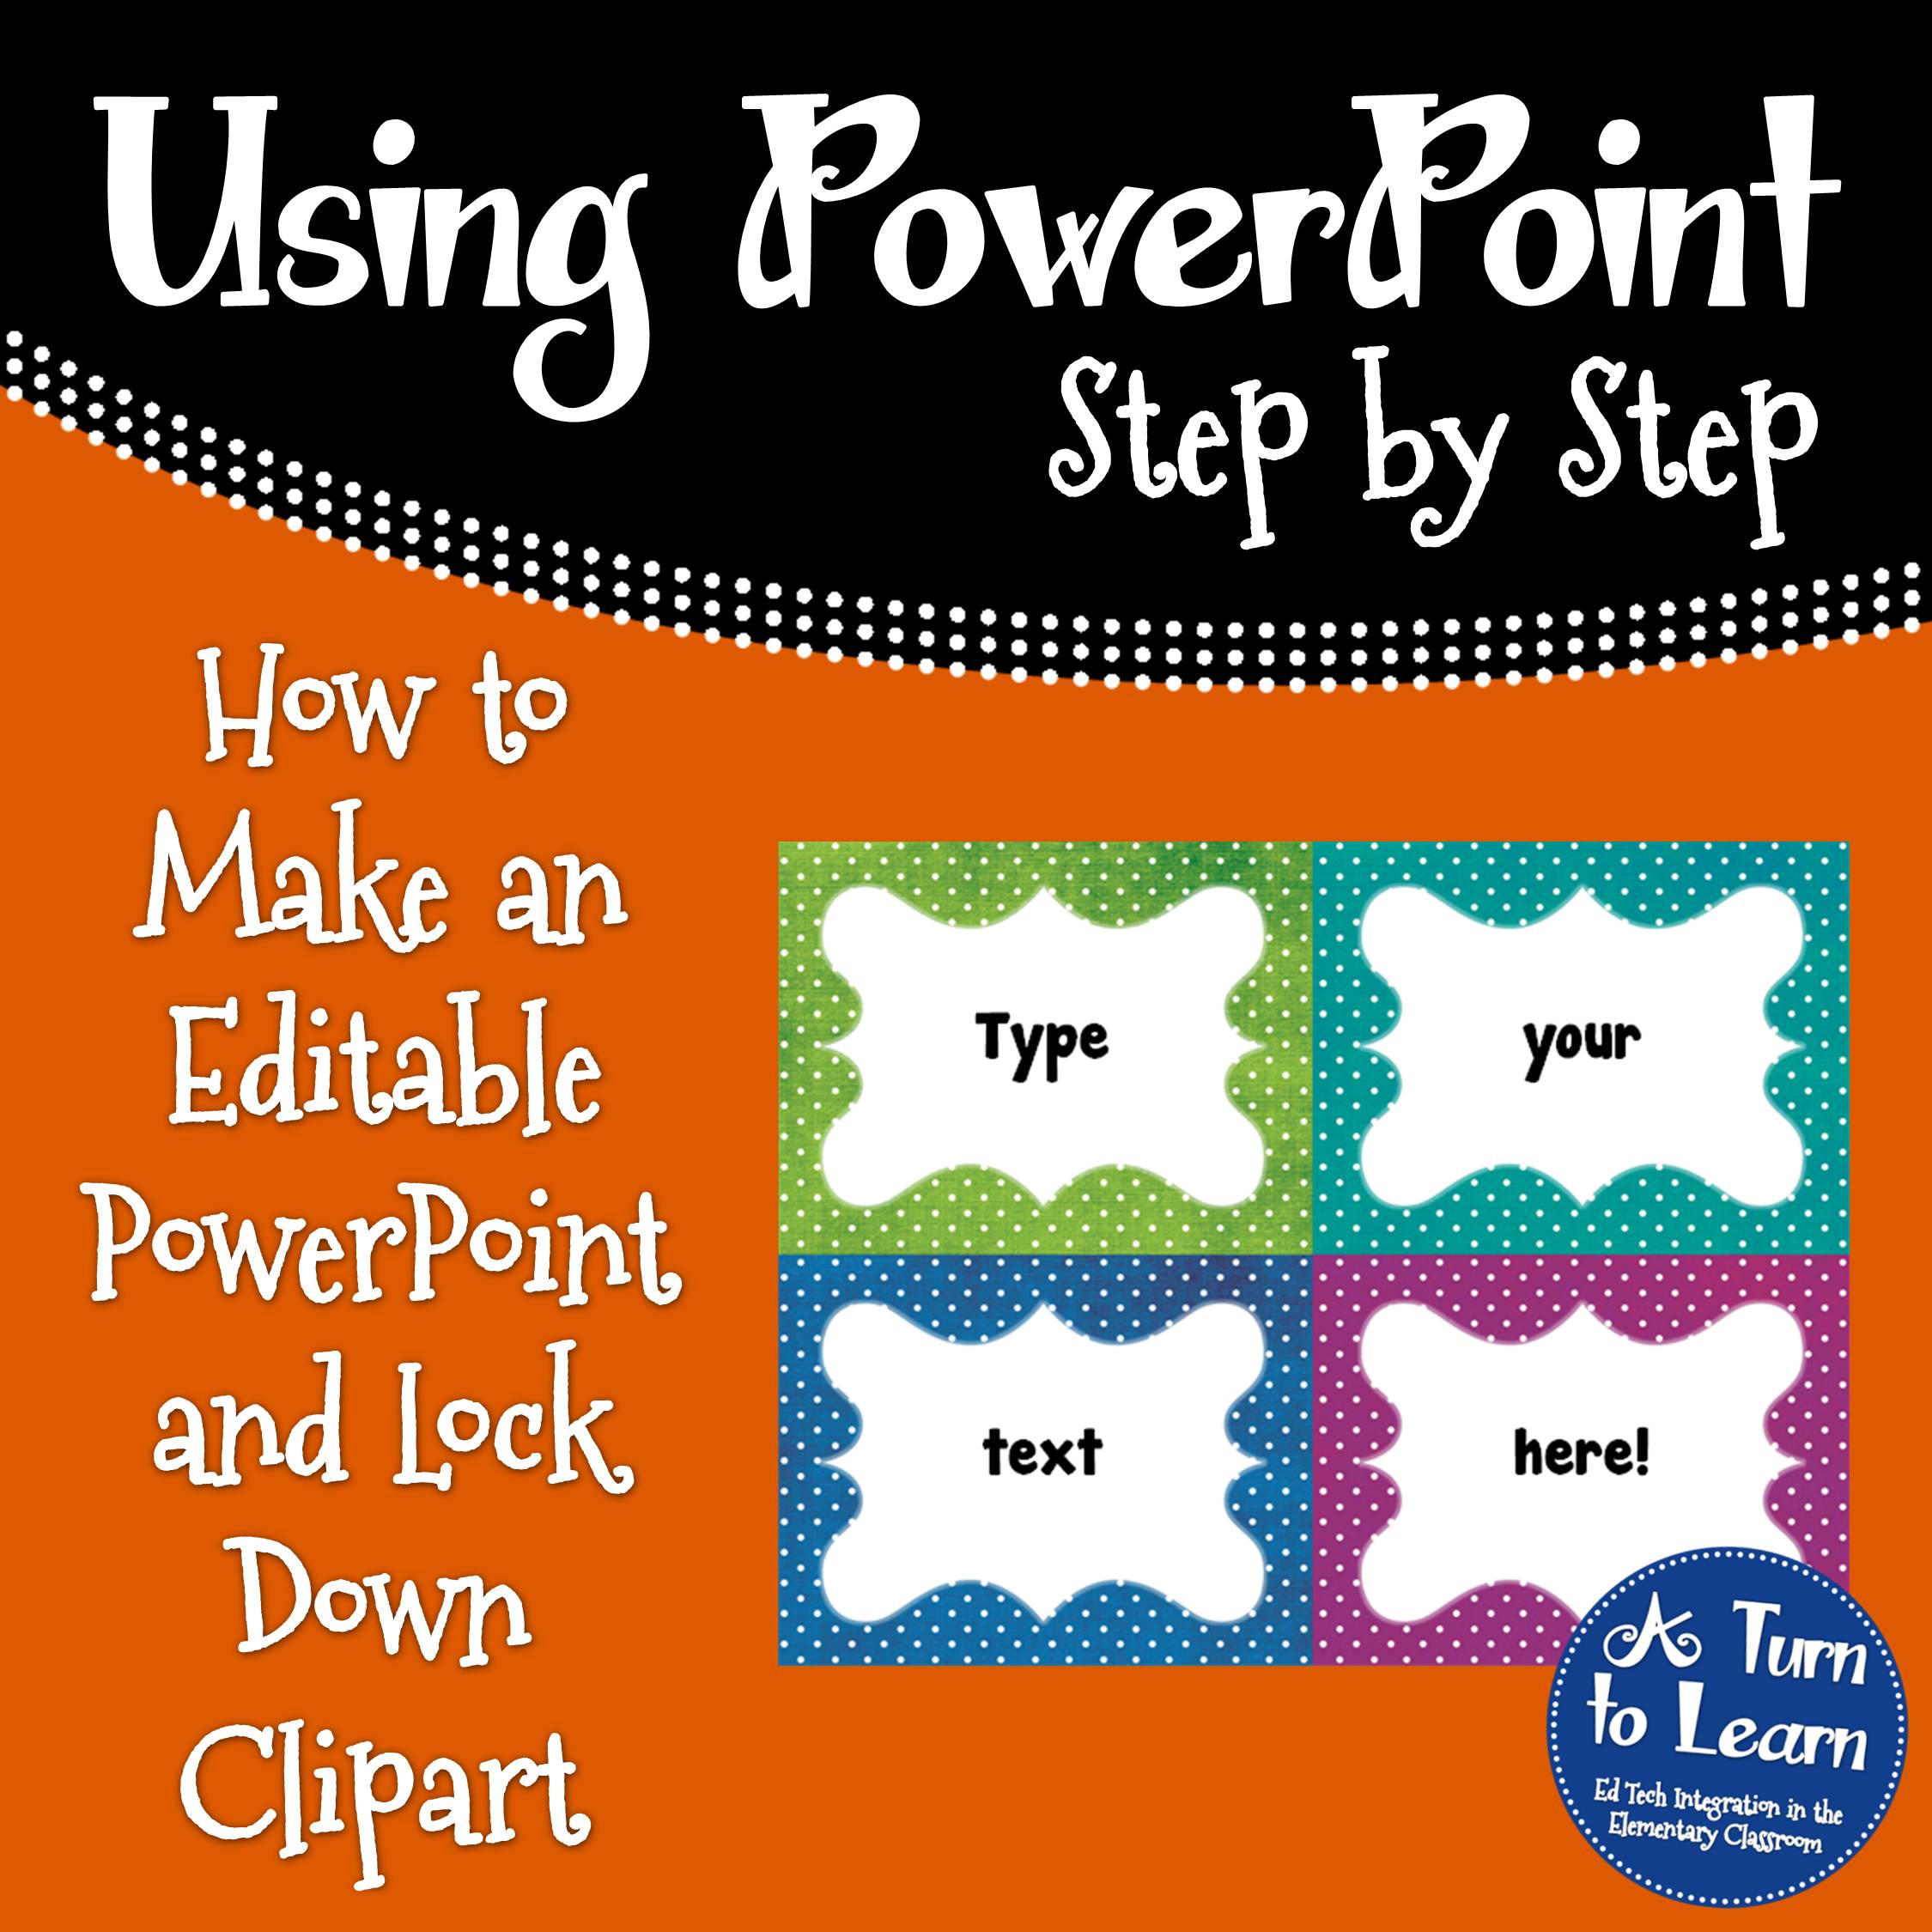 How to Make an Editable PowerPoint and Lock Down Clipart